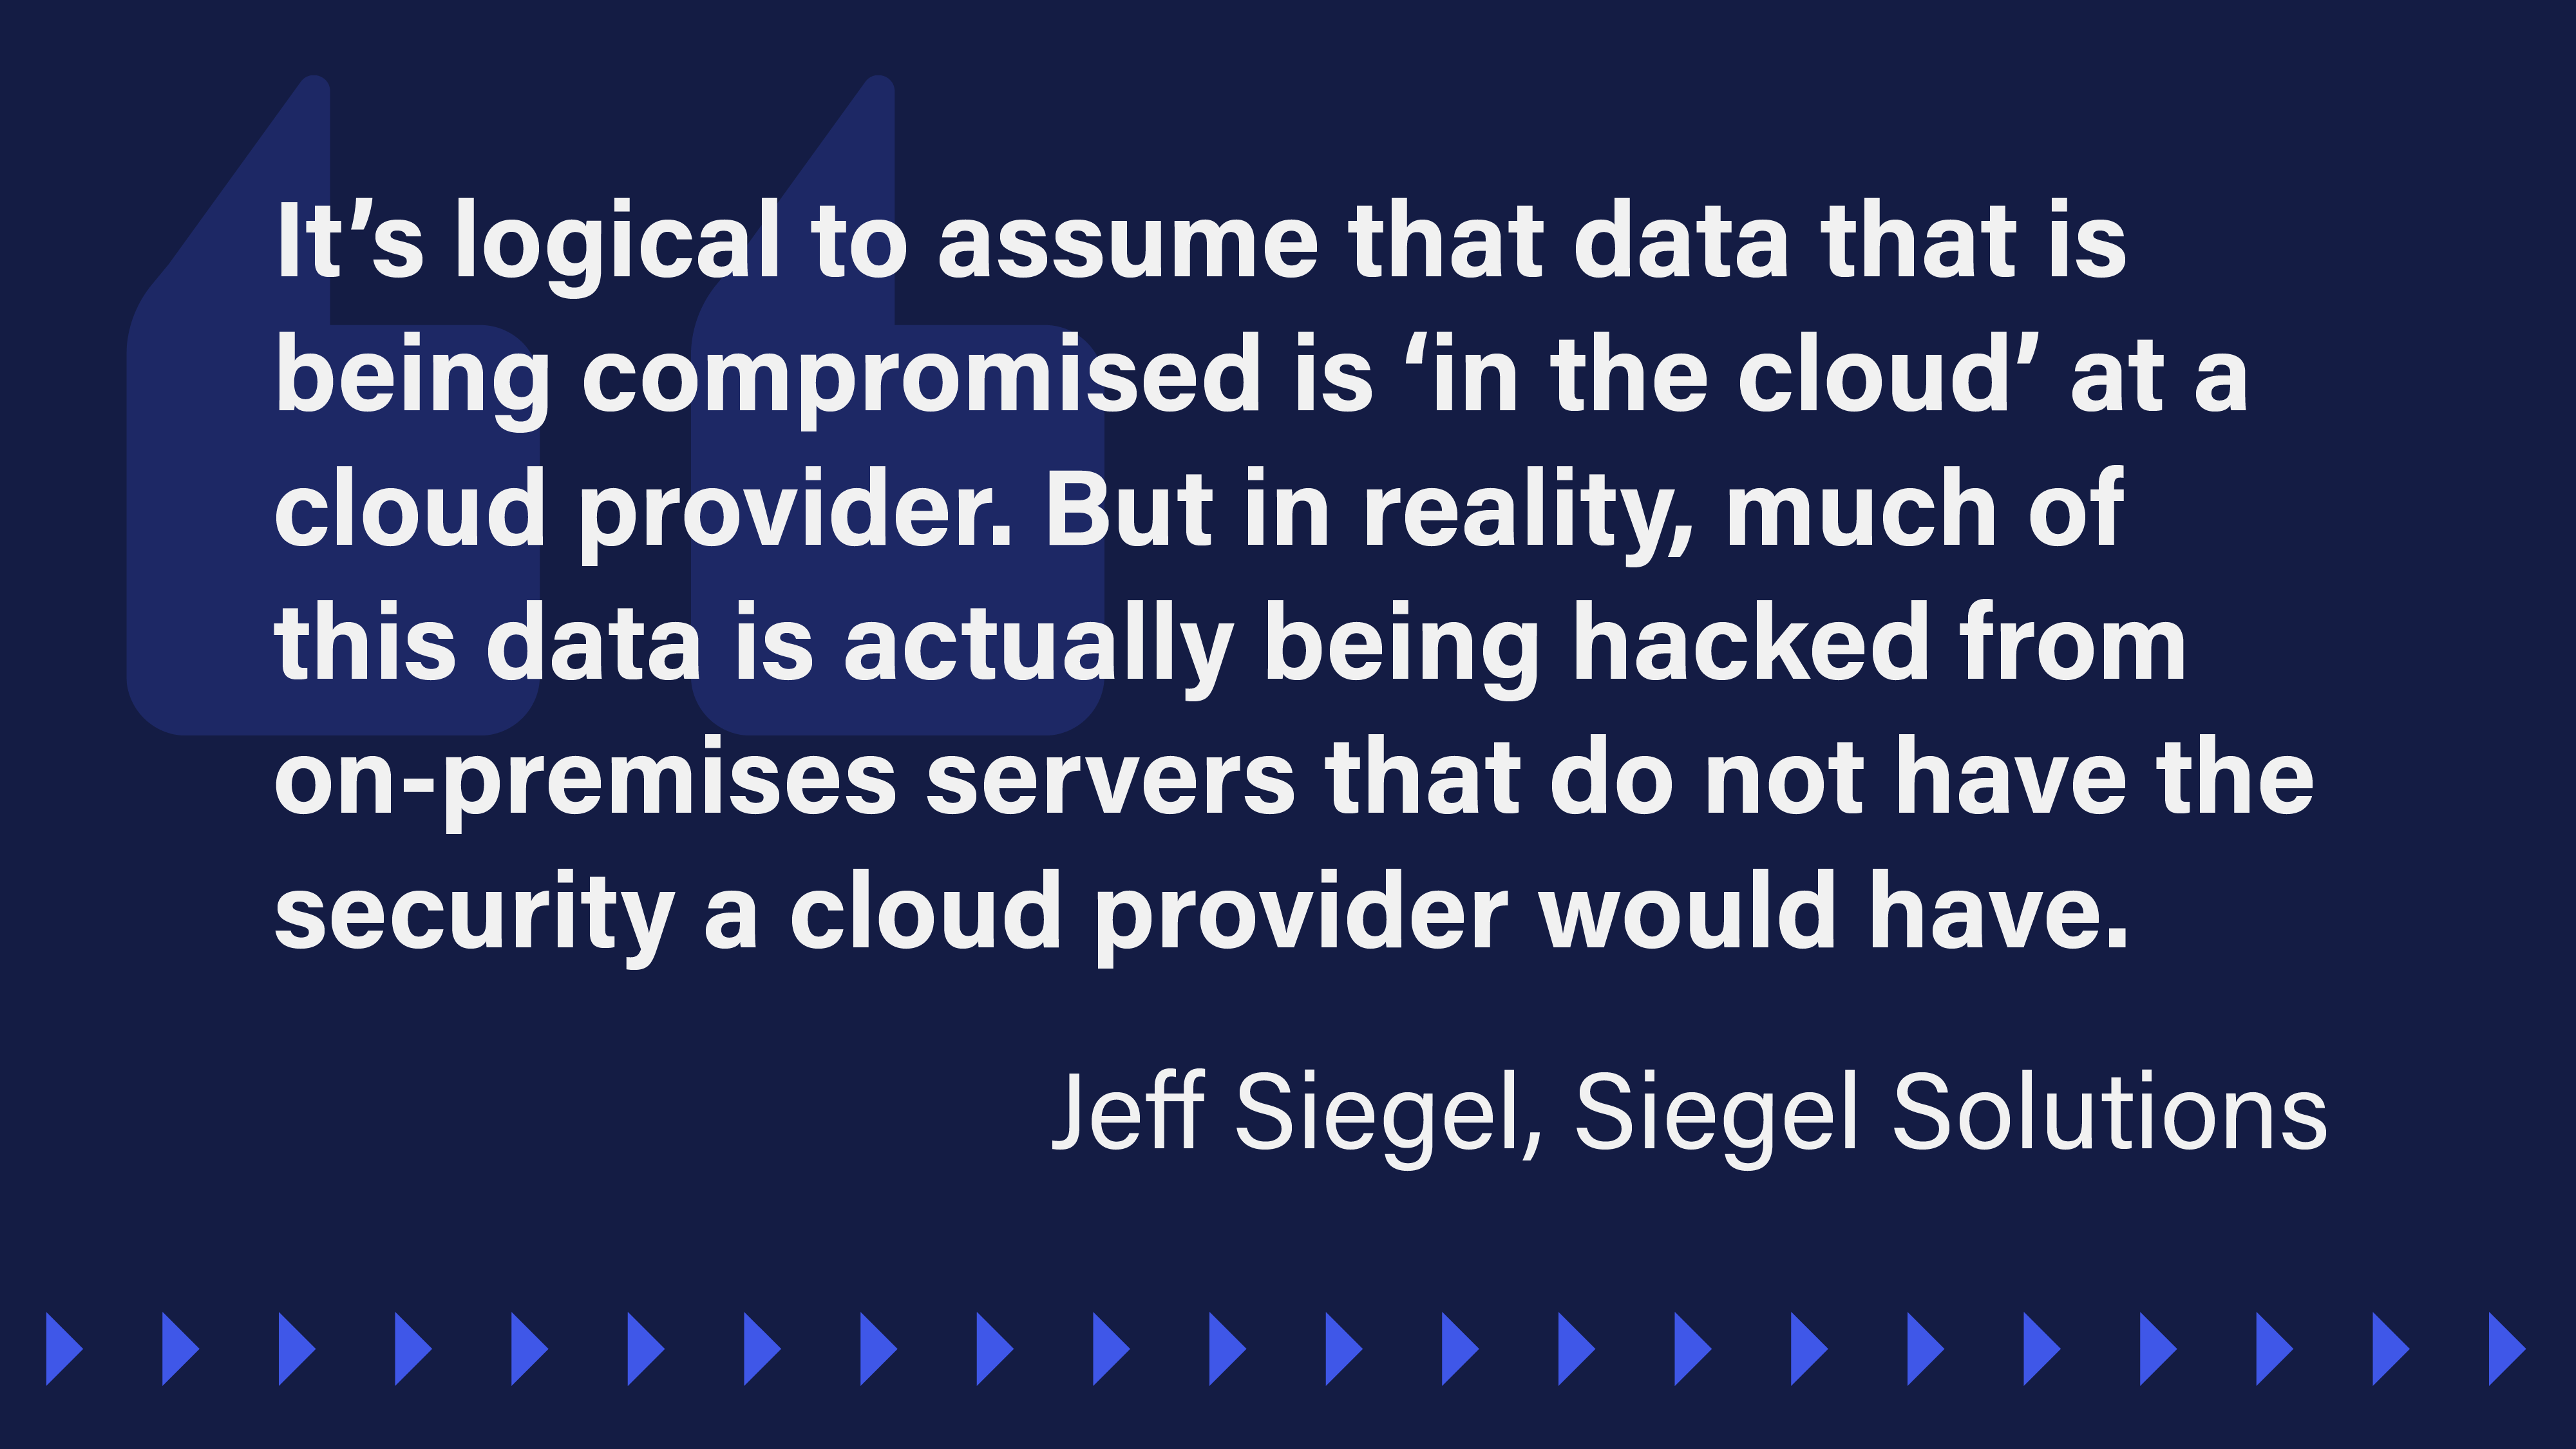 An image that reads: “It’s logical to assume that data that is being compromised is ‘in the cloud’ at a cloud provider. But in reality, much of this data is actually being hacked from on-premises servers that do not have the security a cloud provider would have.”  